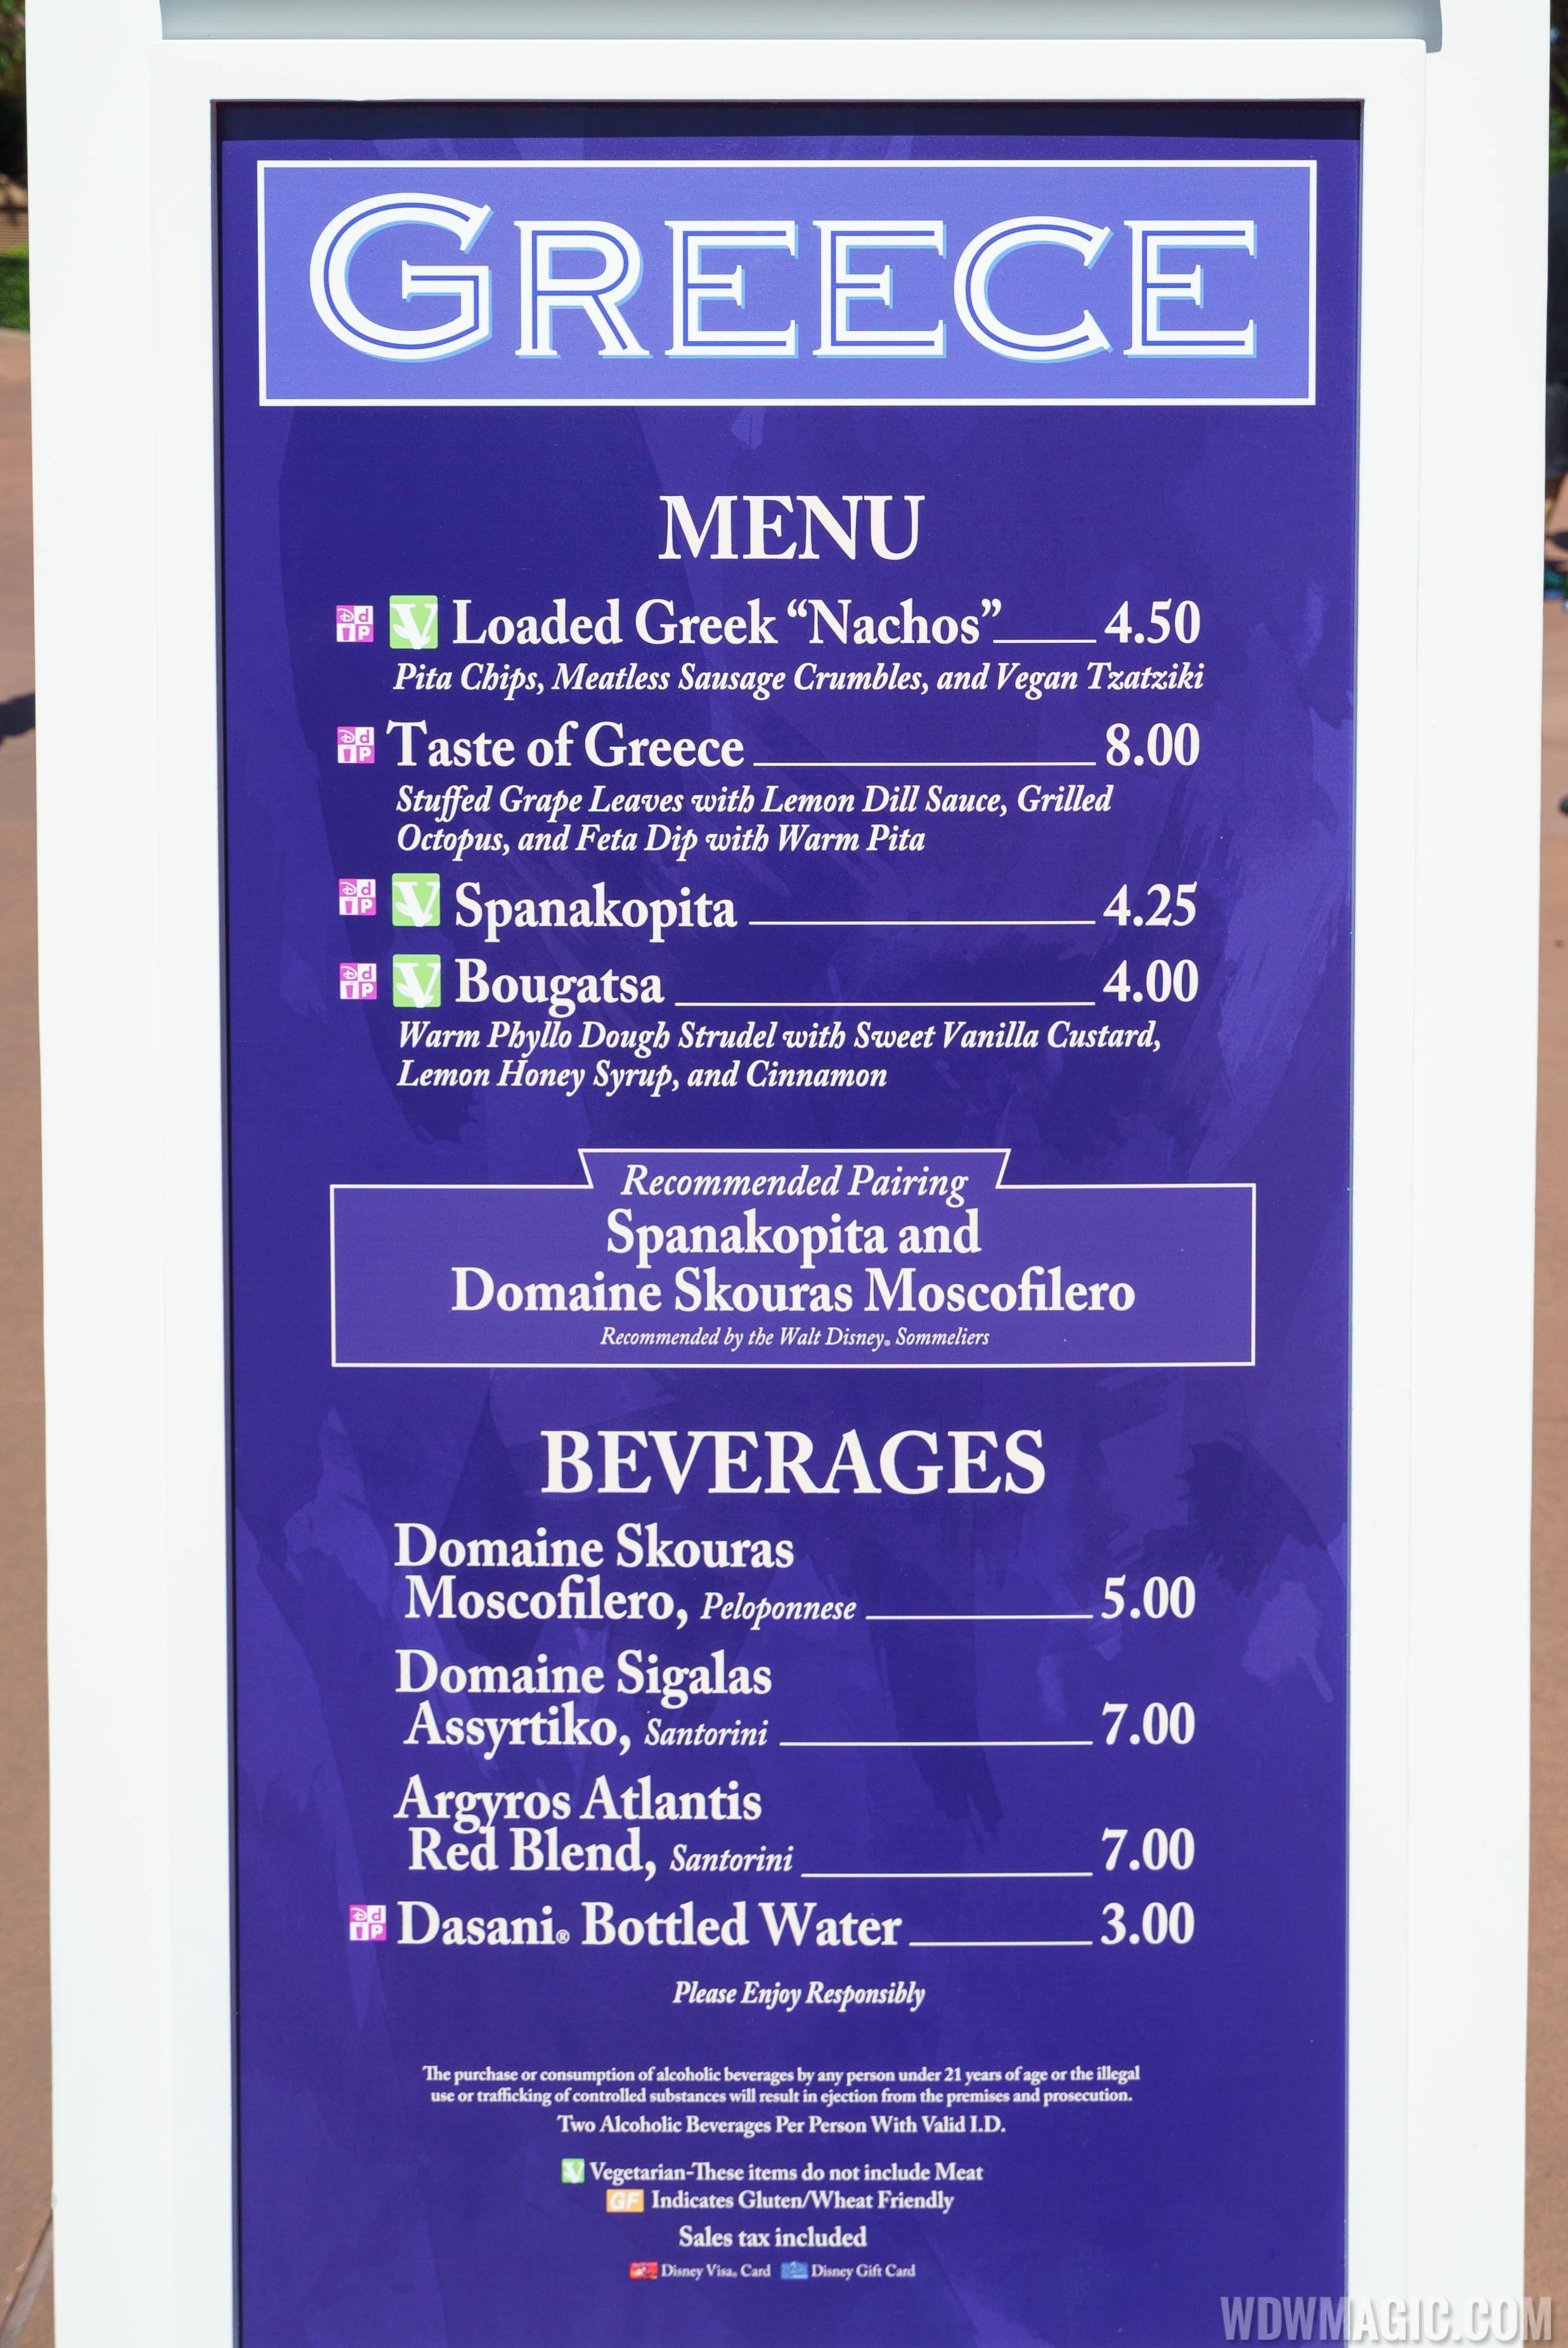 2017 Epcot Food and Wine Festival Marketplace kiosks, menus and pricing